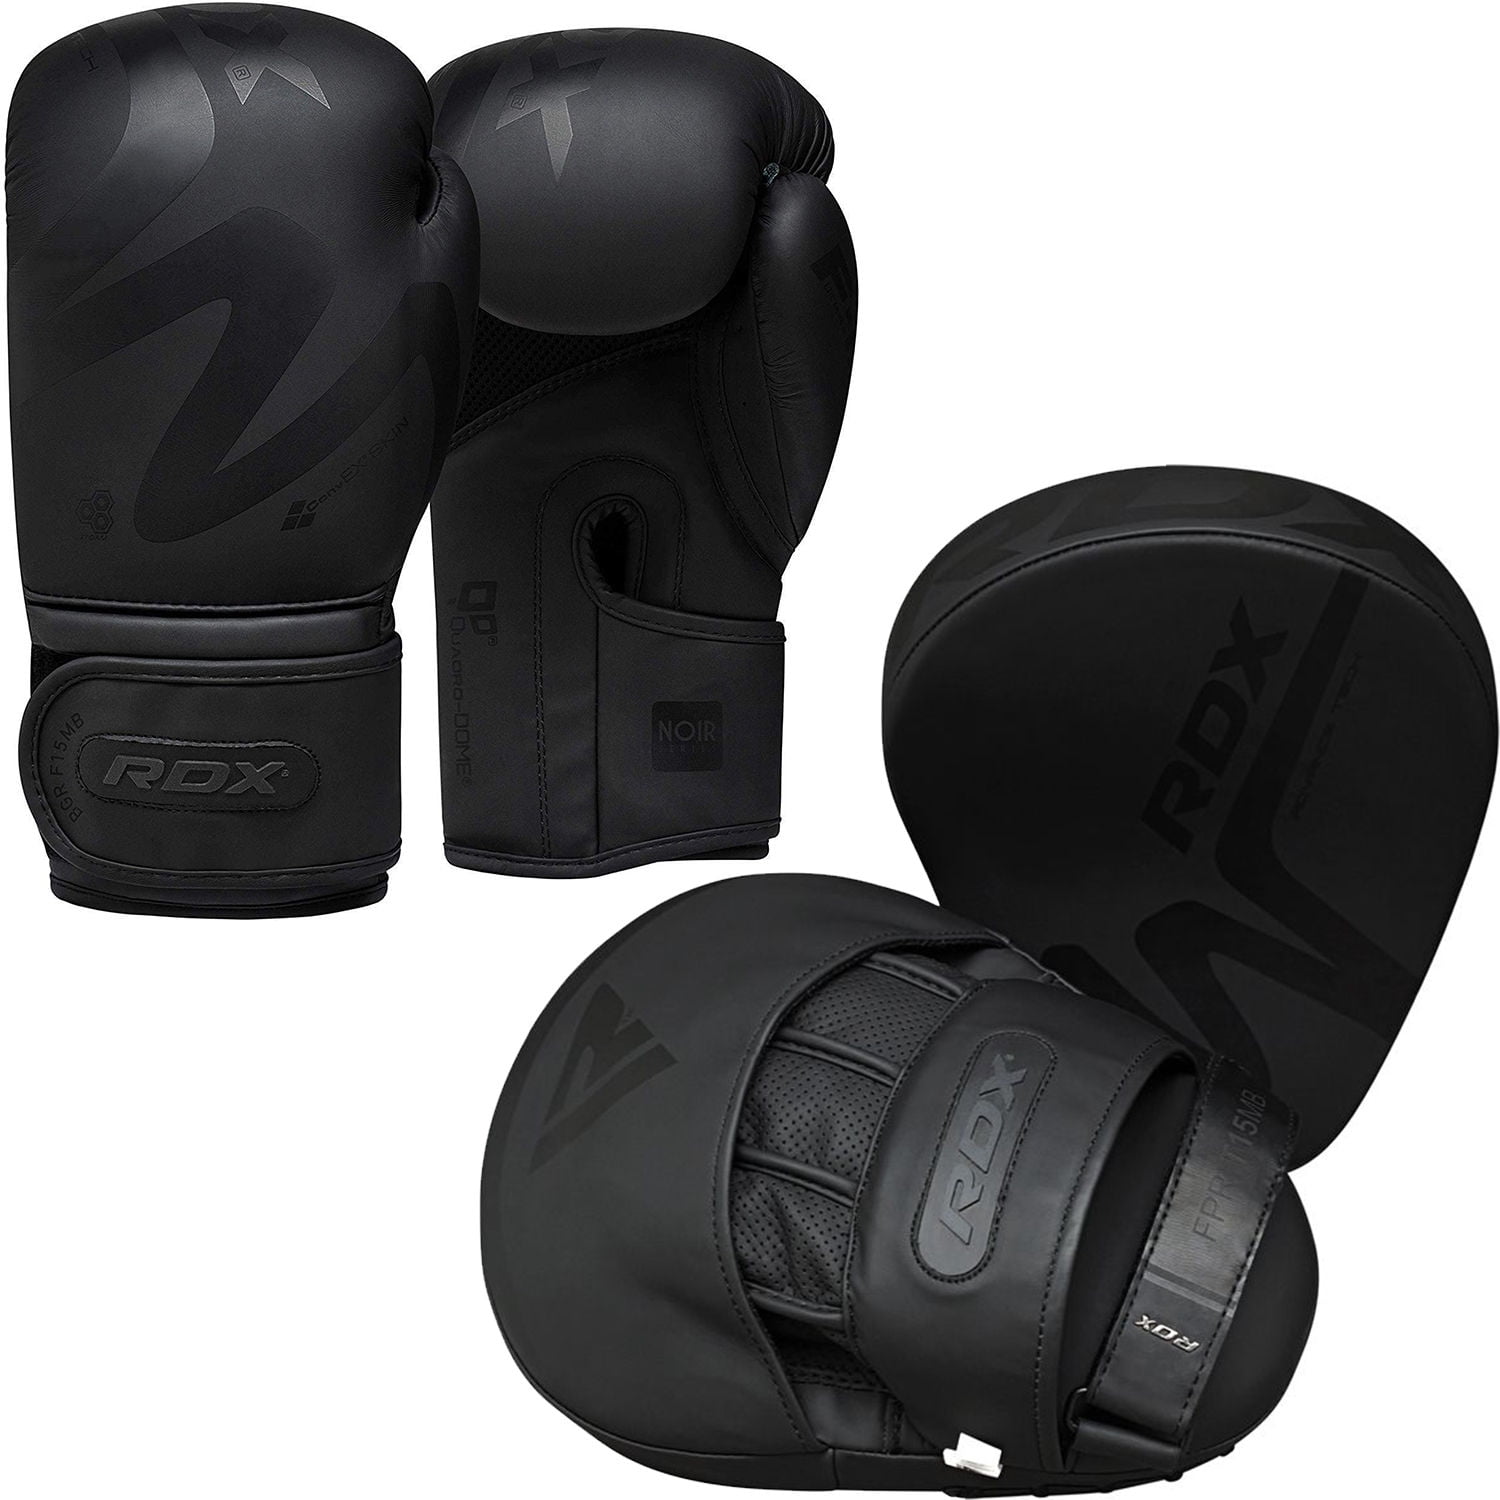 Training Boxing Gloves and Focus Pads Set Fitness Mitt Hook & Jabs Mitts Gym Set 